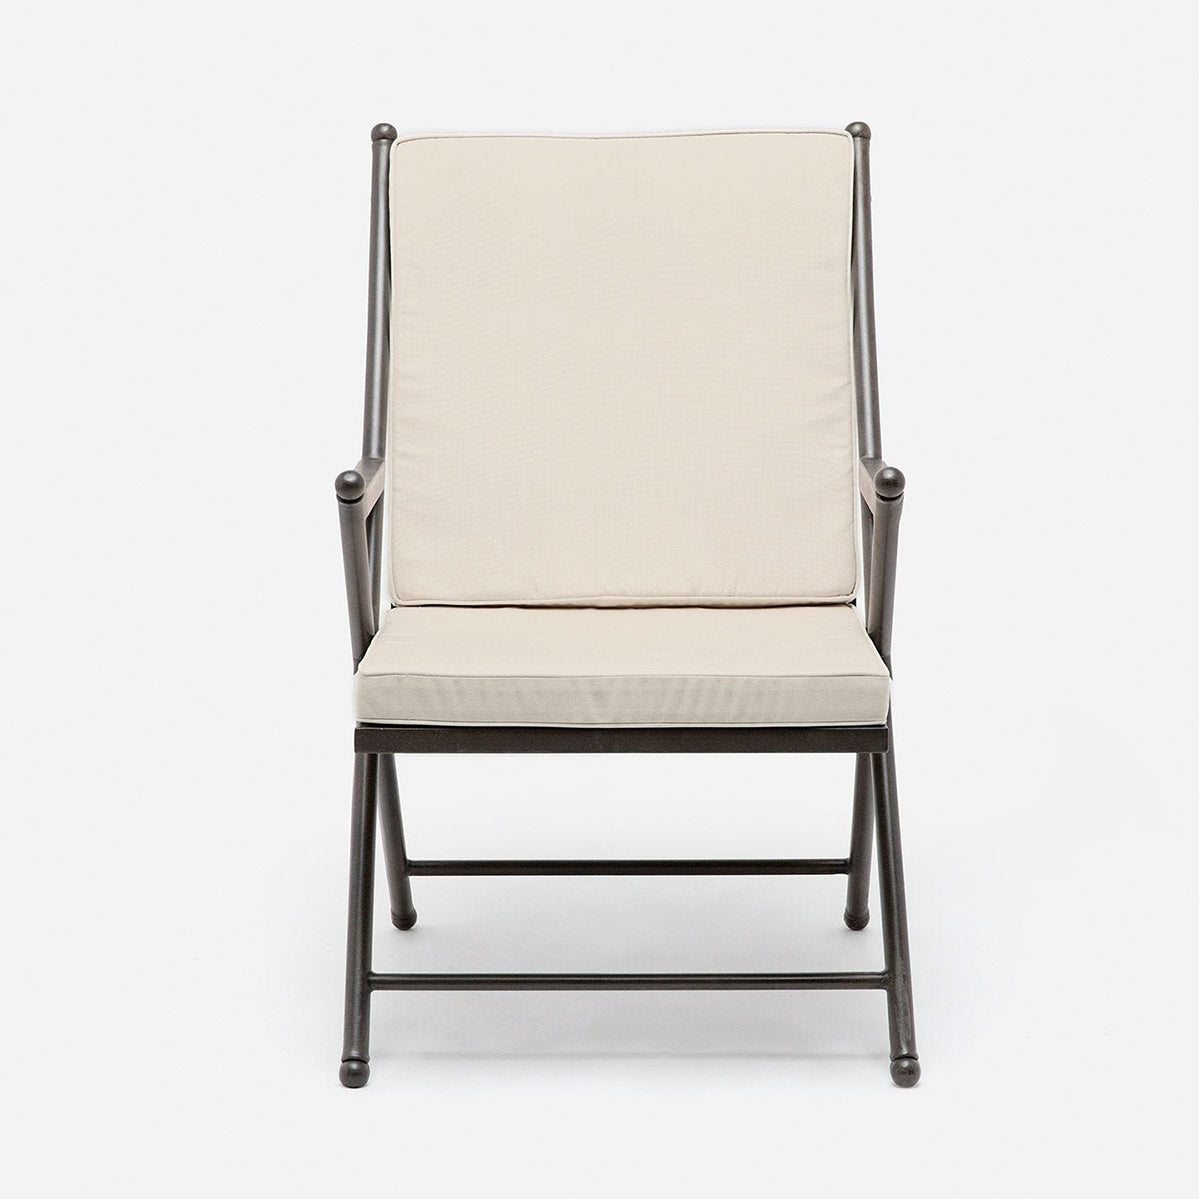 Made Goods Balta Outdoor Dining Chair in Clyde Fabric